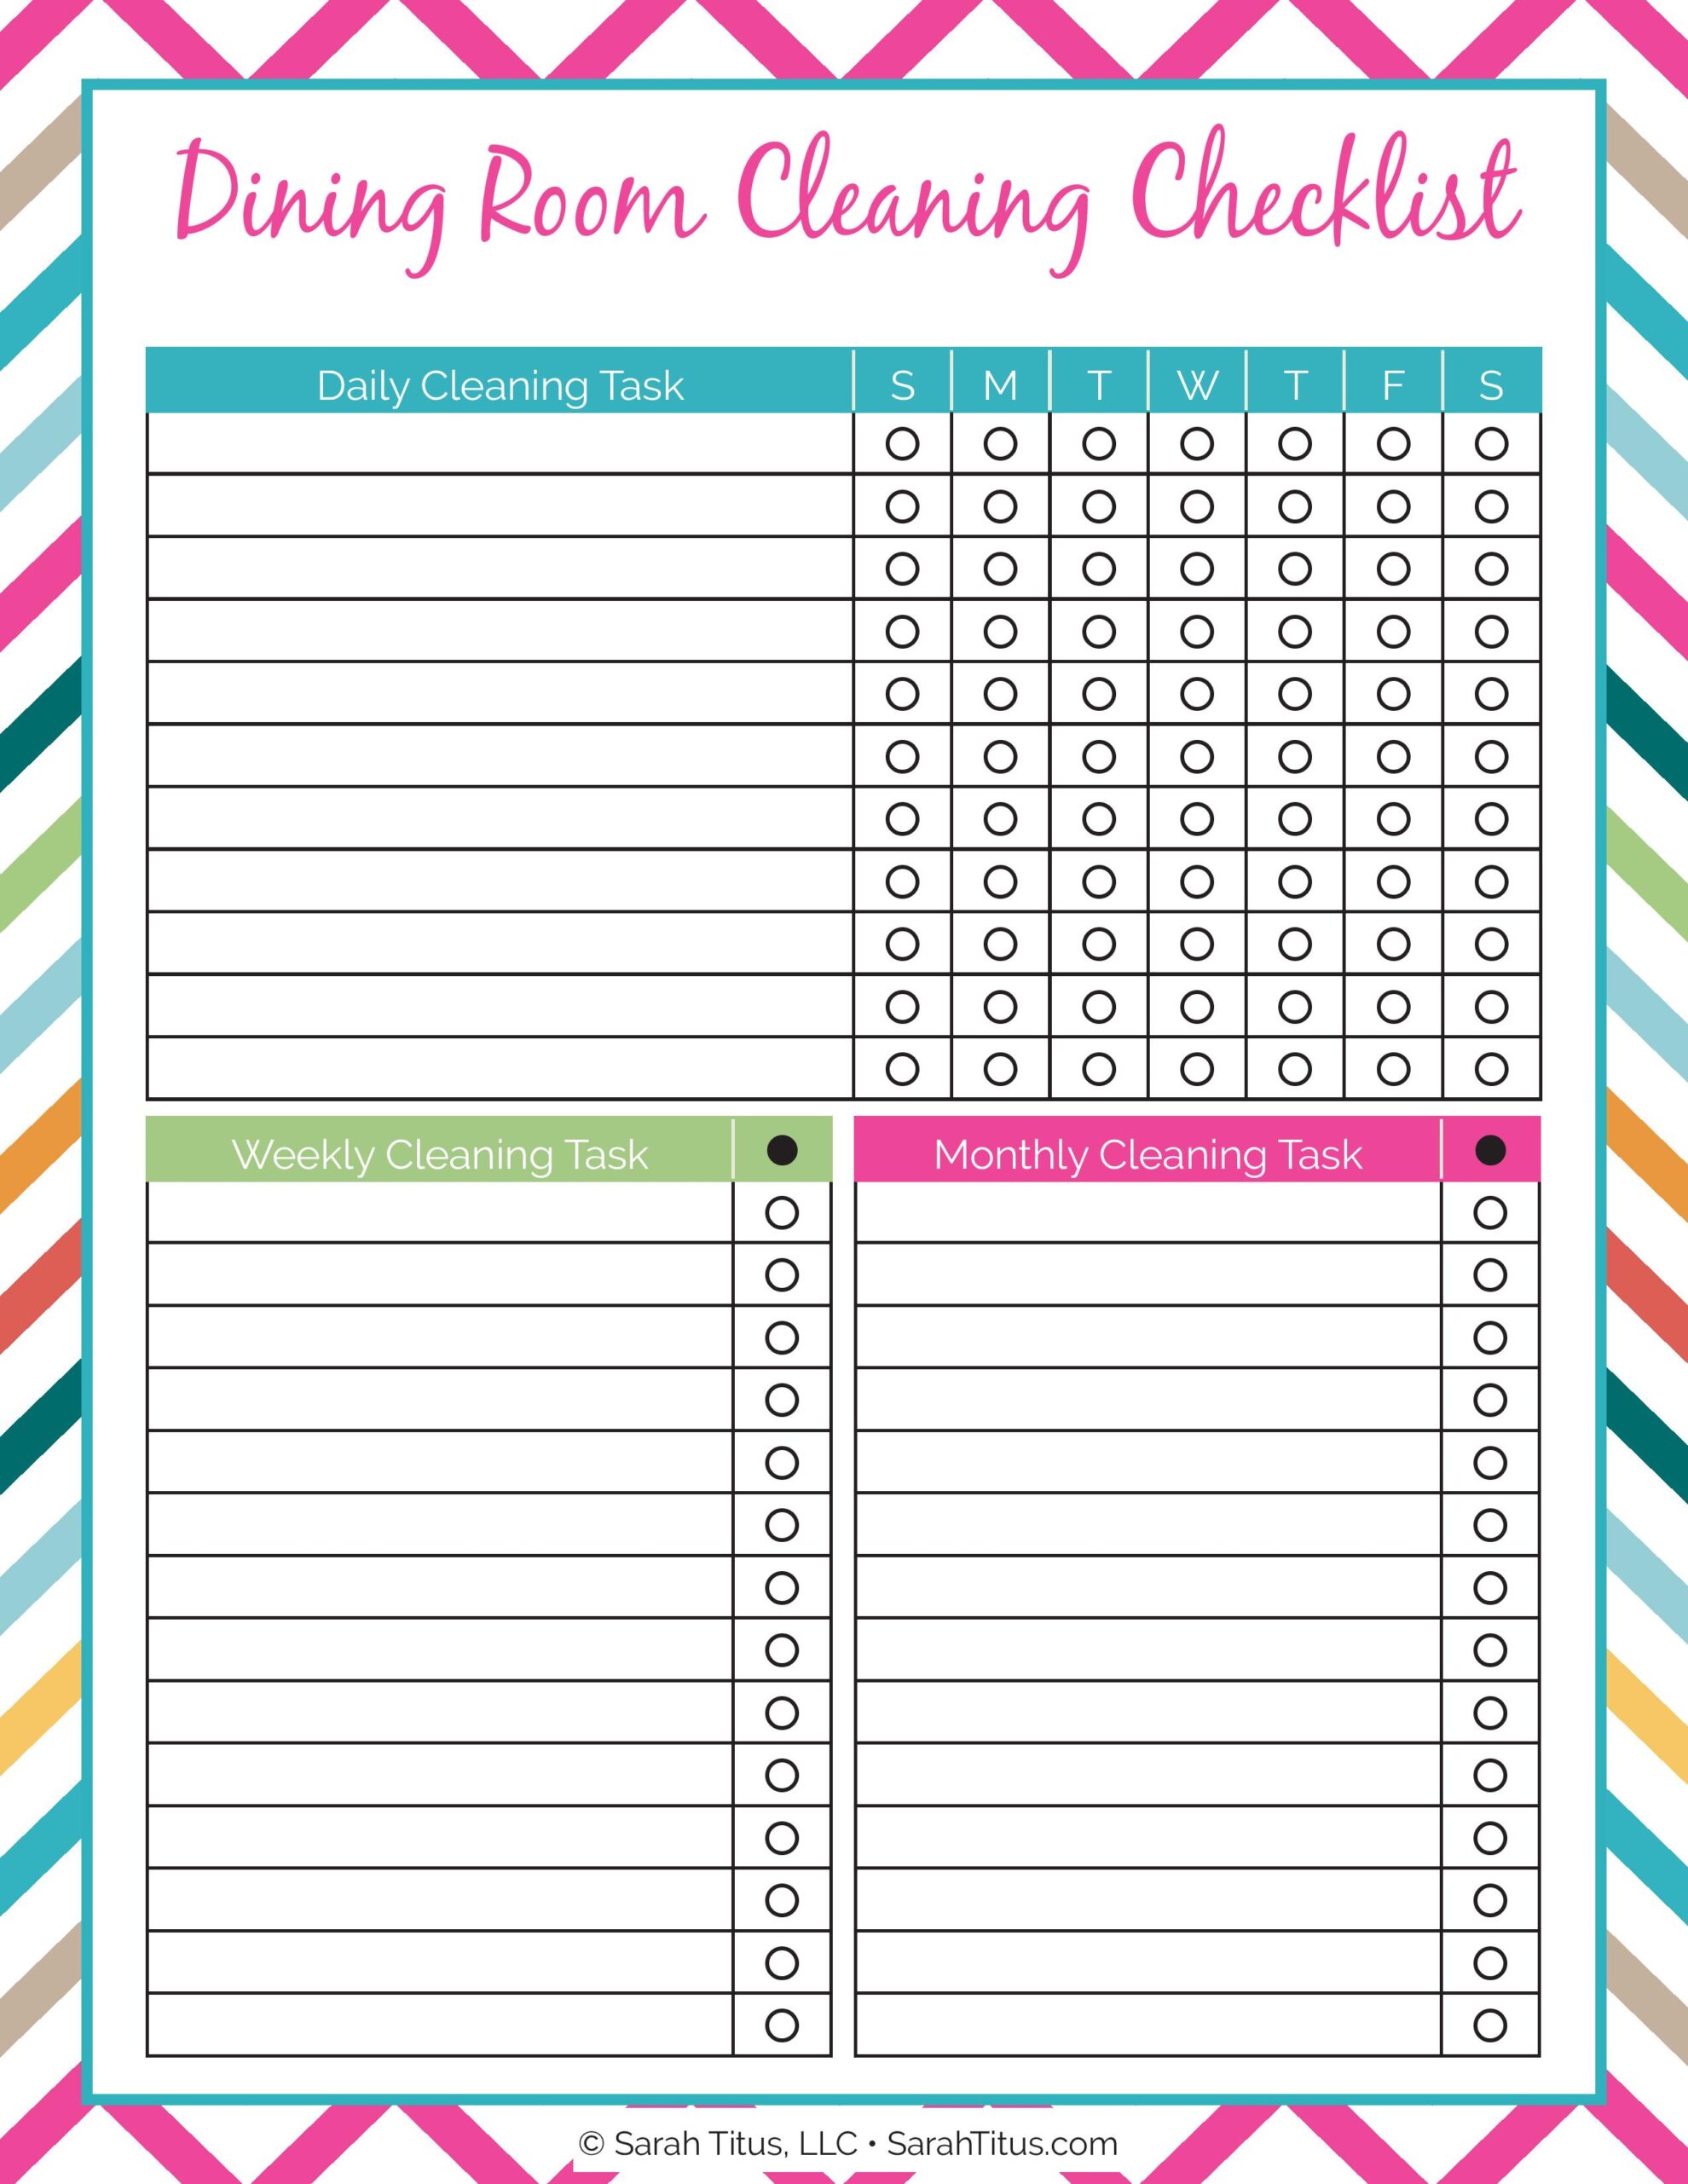 cleaning-binder-dining-room-cleaning-checklist-sarah-titus